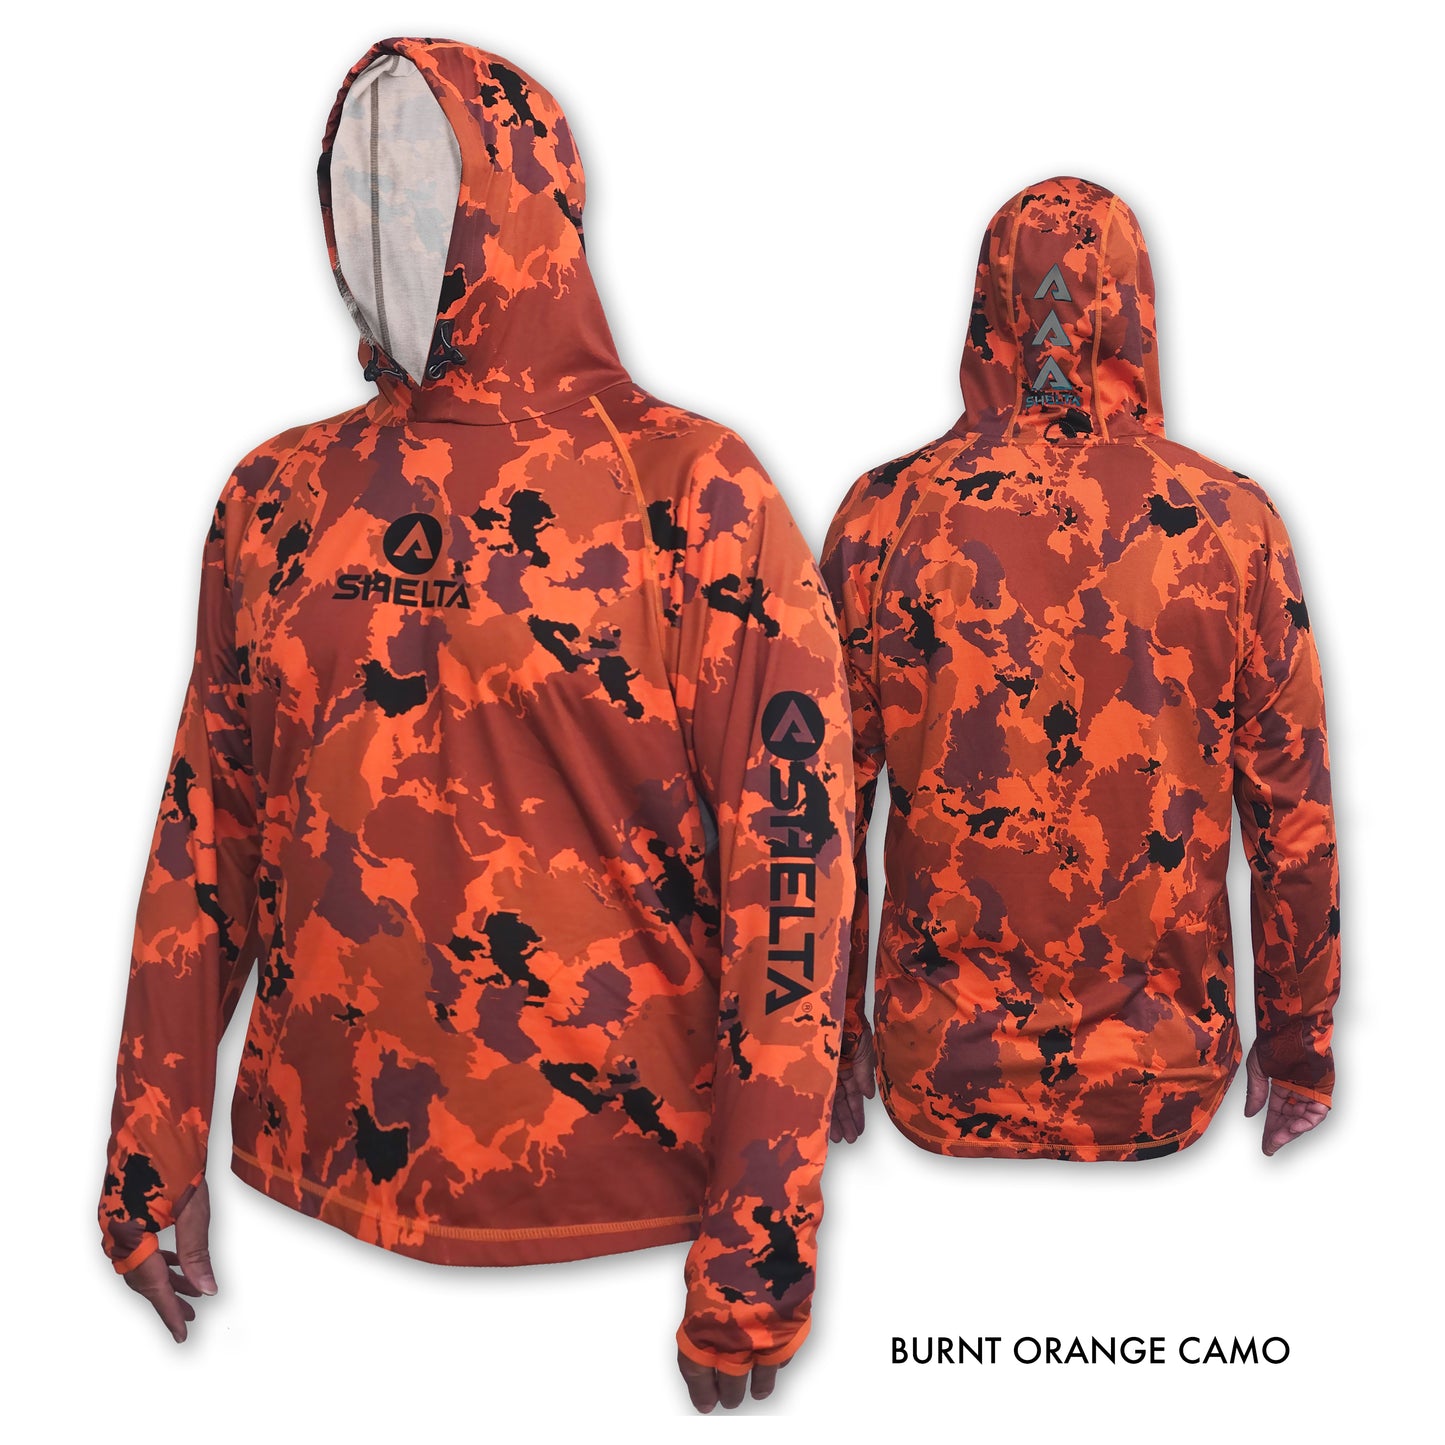 The Assault Hoodie in the color Burnt Orange Camo is engineered & built with sun protection, function, and durability in mind.  Offering features consistent with Shelta core values and innovation goals.   UPF 50+ UV protection, the highest rating given.  Blocks 98% of UVA/UVB radiation Loose comfort fit Moisture Wicking Sleeves with thumb hole & finger loop for multiple hand protection options